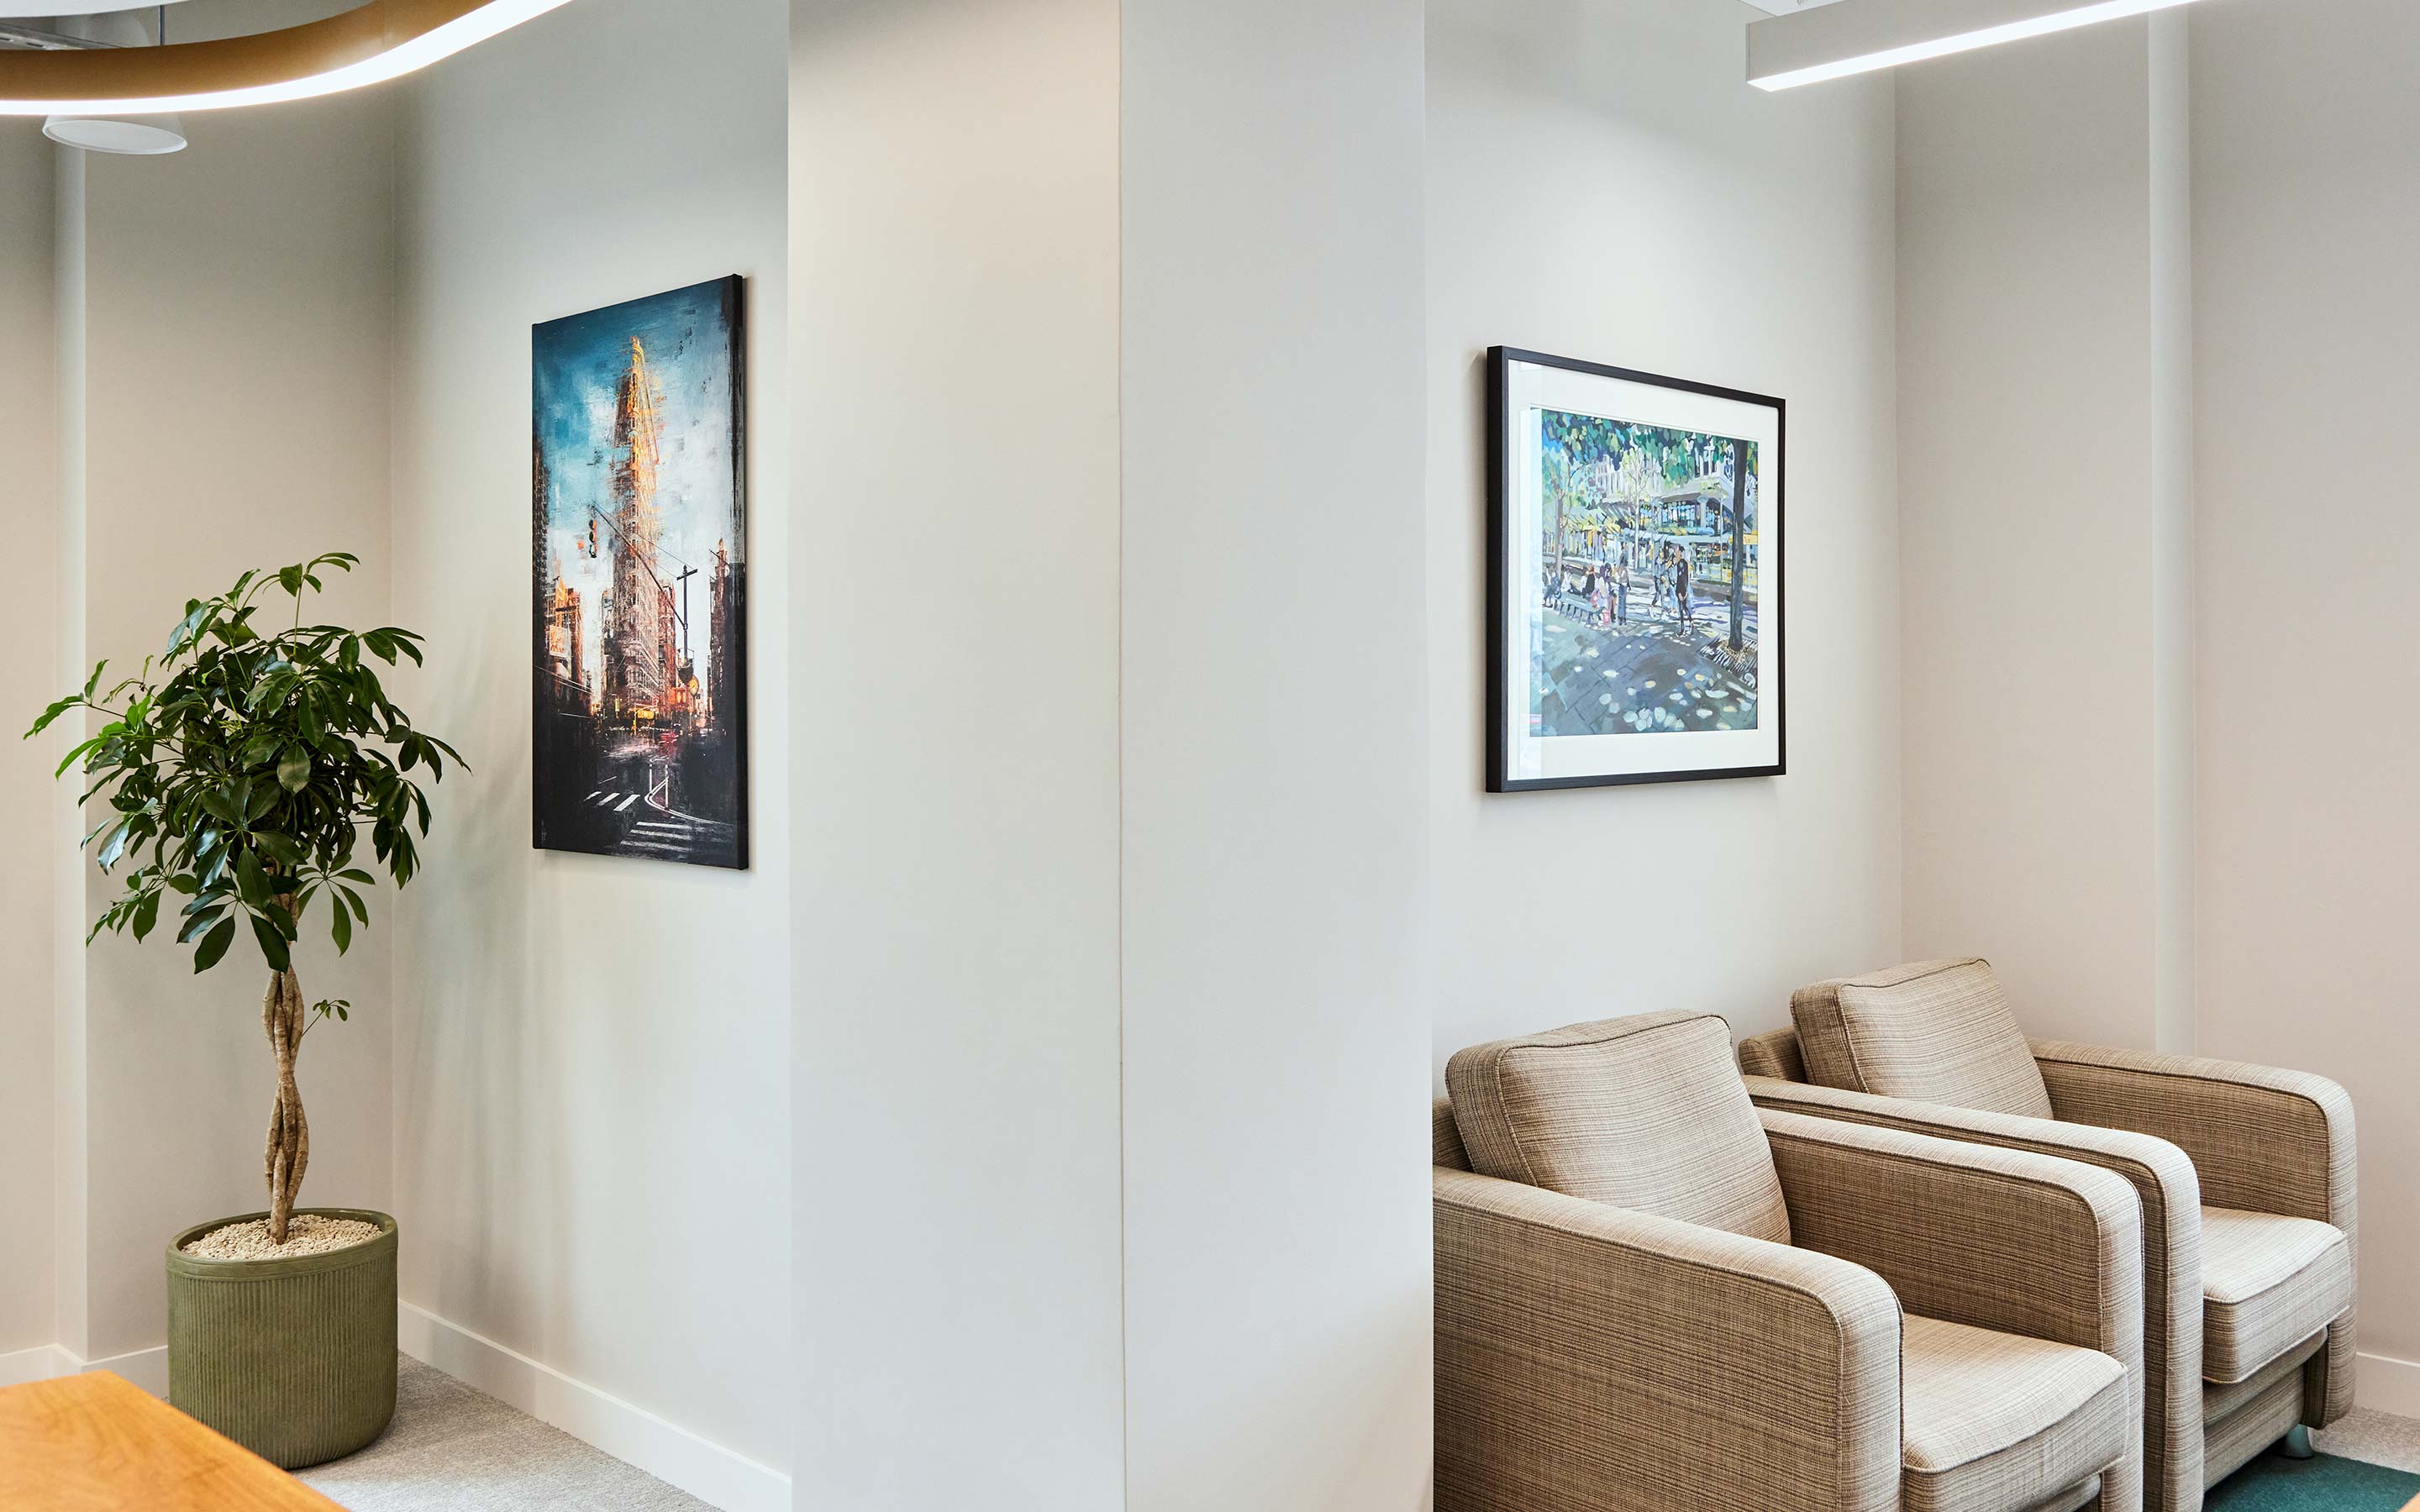 Artwork hangs above two office armchairs in a meeting room